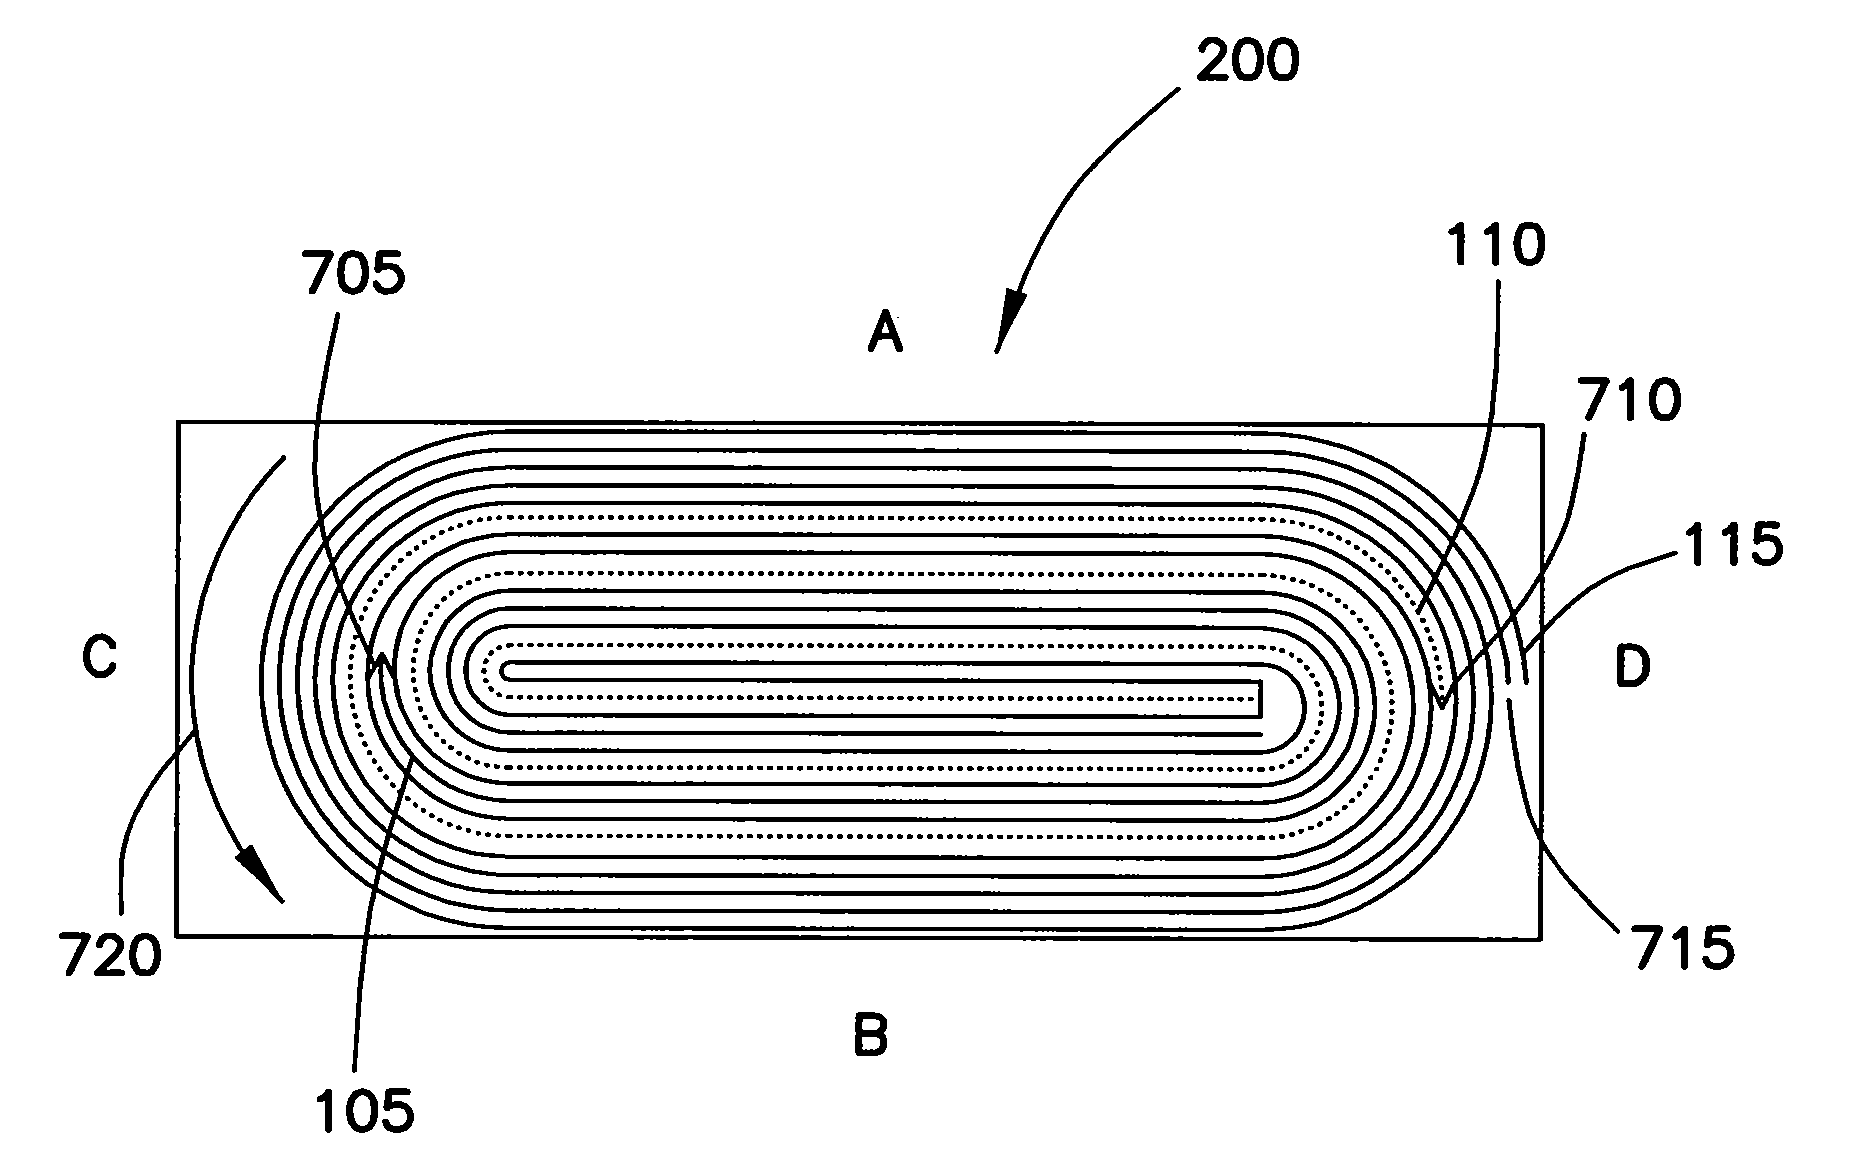 Electrochemical cell having a coiled core